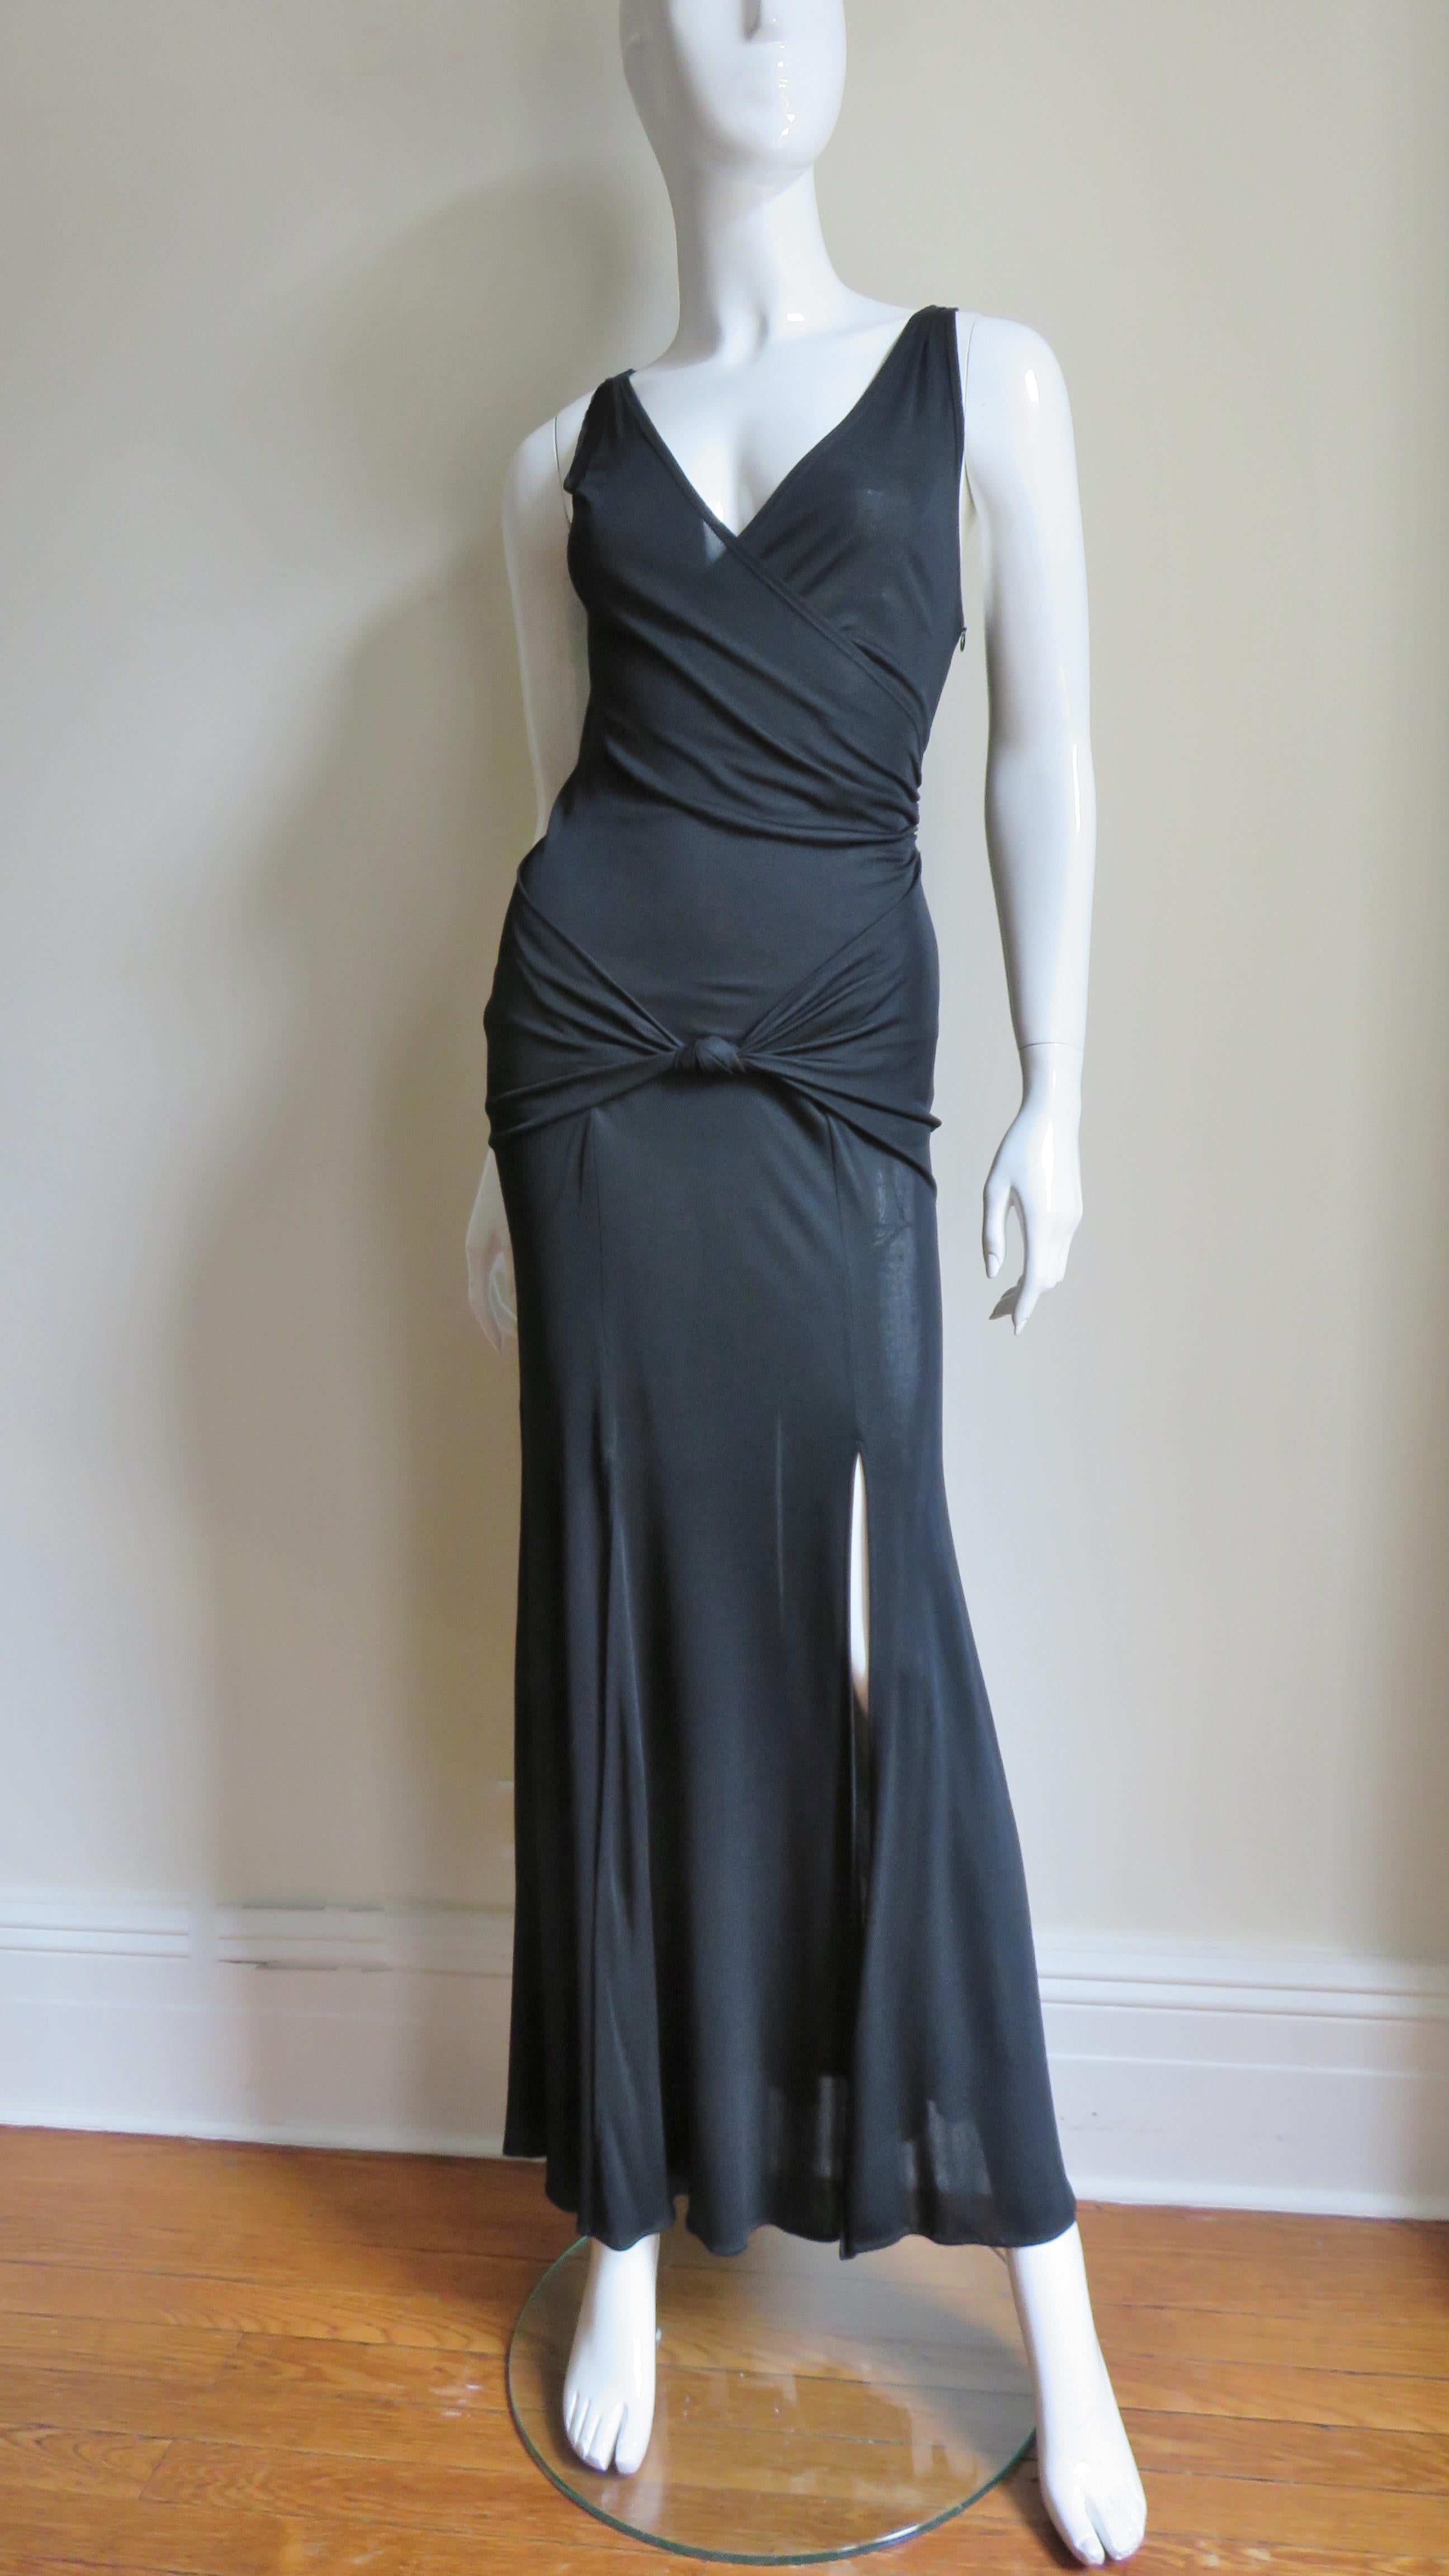 A great dress in black light weight jersey from Moschino.  It is maxi length with a wrap bodice, ruched knotted hip band and fabulous carwash detail by way of 6 thigh high panels at the hem.  It is unlined and has a side zipper.  
Appears unworn. 